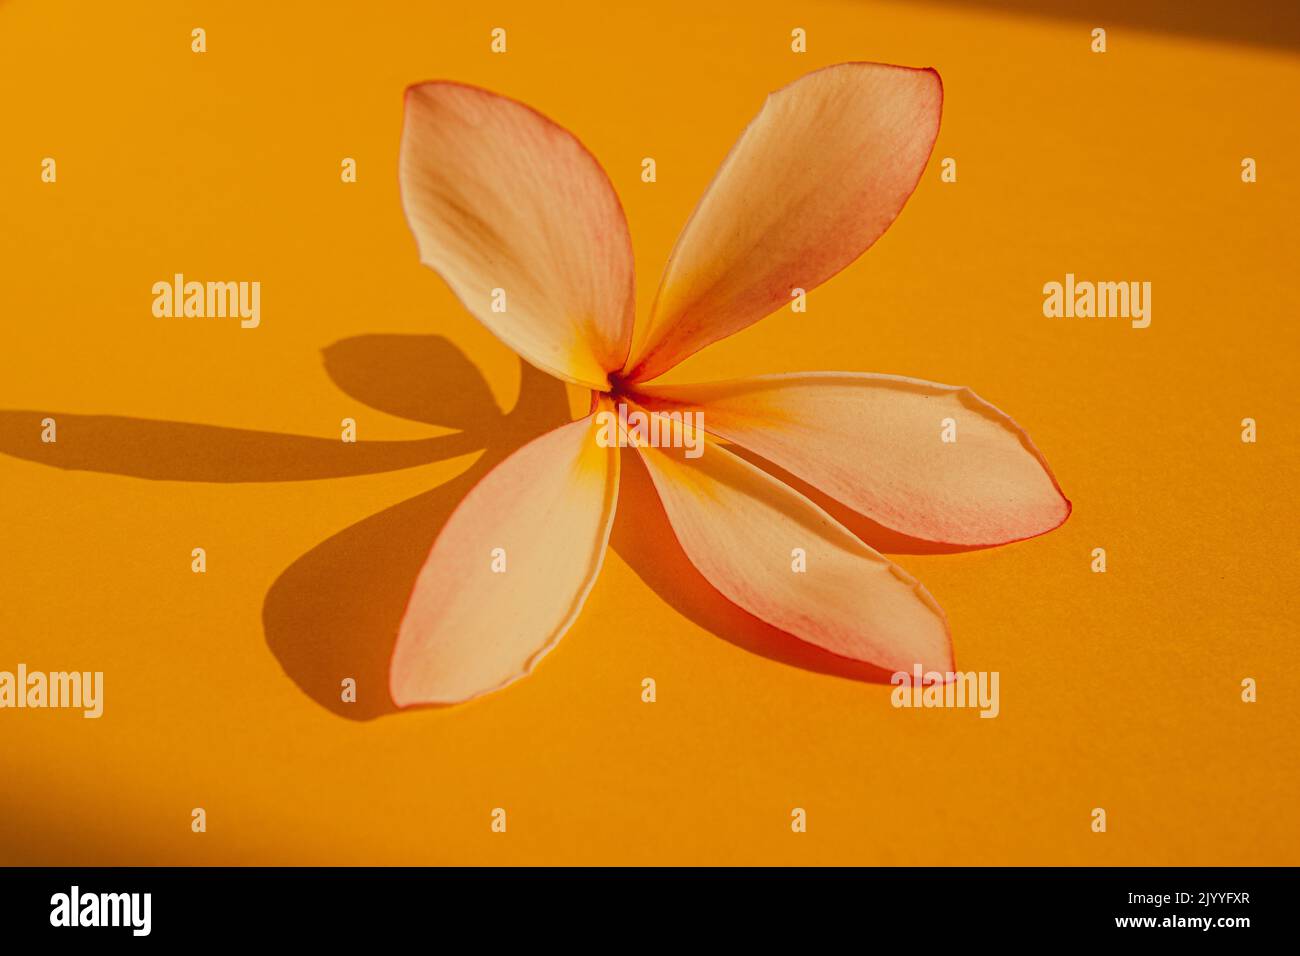 Frangipani flower on a bright yellow background with late afternoon sun creating a warm glow and shadows Stock Photo